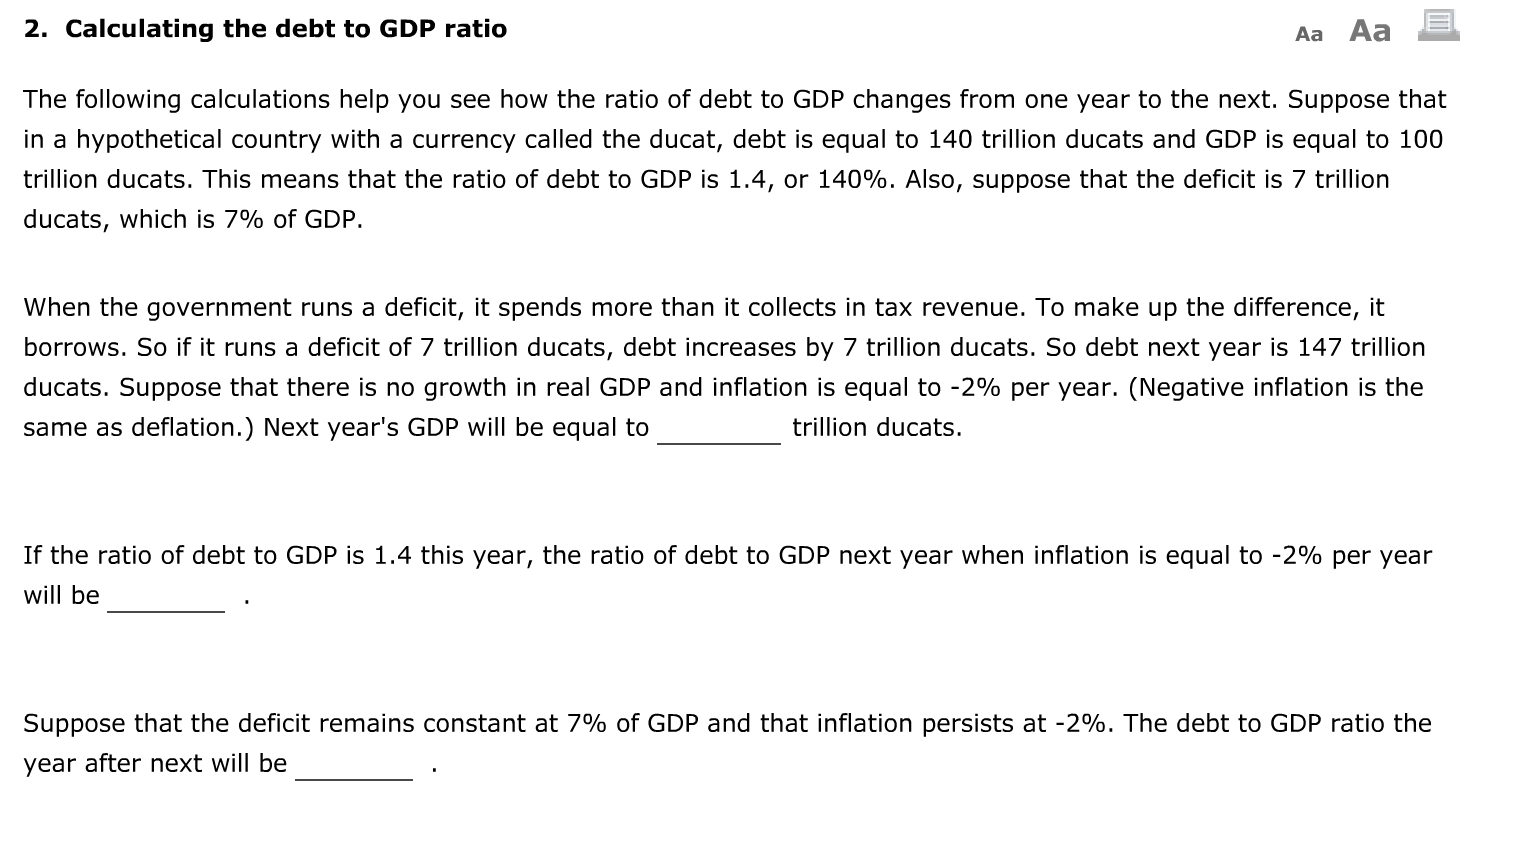 The following calculations help you see how the ratio of debt to GDP changes from one year to the next. Suppose that
in a hypothetical country with a currency called the ducat, debt is equal to 140 trillion ducats and GDP is equal to 100
trillion ducats. This means that the ratio of debt to GDP is 1.4, or 140%. Also, suppose that the deficit is 7 trillion
ducats, which is 7% of GDP.
When the government runs a deficit, it spends more than it collects in tax revenue. To make up the difference, it
borrows. So if it runs a deficit of 7 trillion ducats, debt increases by 7 trillion ducats. So debt next year is 147 trillion
ducats. Suppose that there is no growth in real GDP and inflation is equal to -2% per year. (Negative inflation is the
same as deflation.) Next year's GDP will be equal to
trillion ducats.
If the ratio of debt to GDP is 1.4 this year, the ratio of debt to GDP next year when inflation is equal to -2% per year
will be
Suppose that the deficit remains constant at 7% of GDP and that inflation persists at -2%. The debt to GDP ratio the
year after next will be
